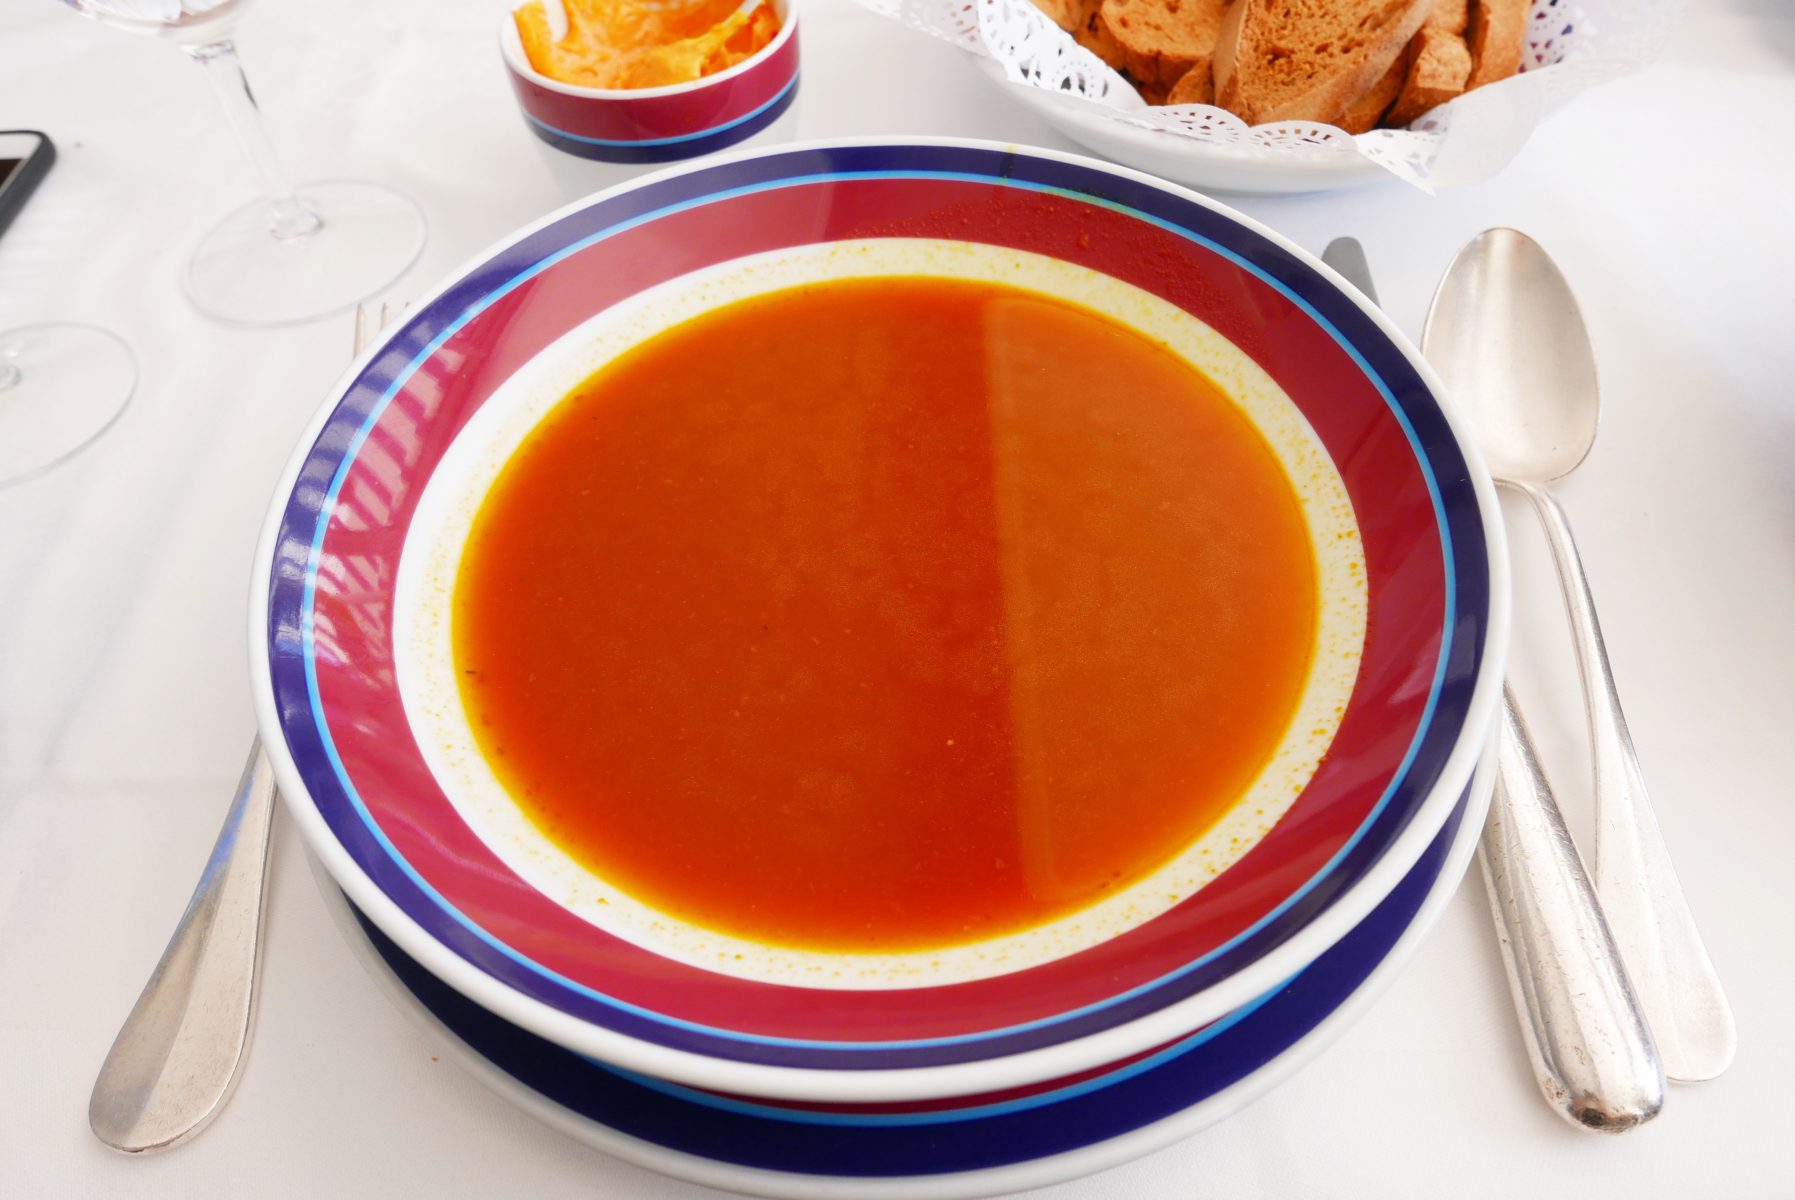 The soup is served with rouille sauce, potatoes and croûtons